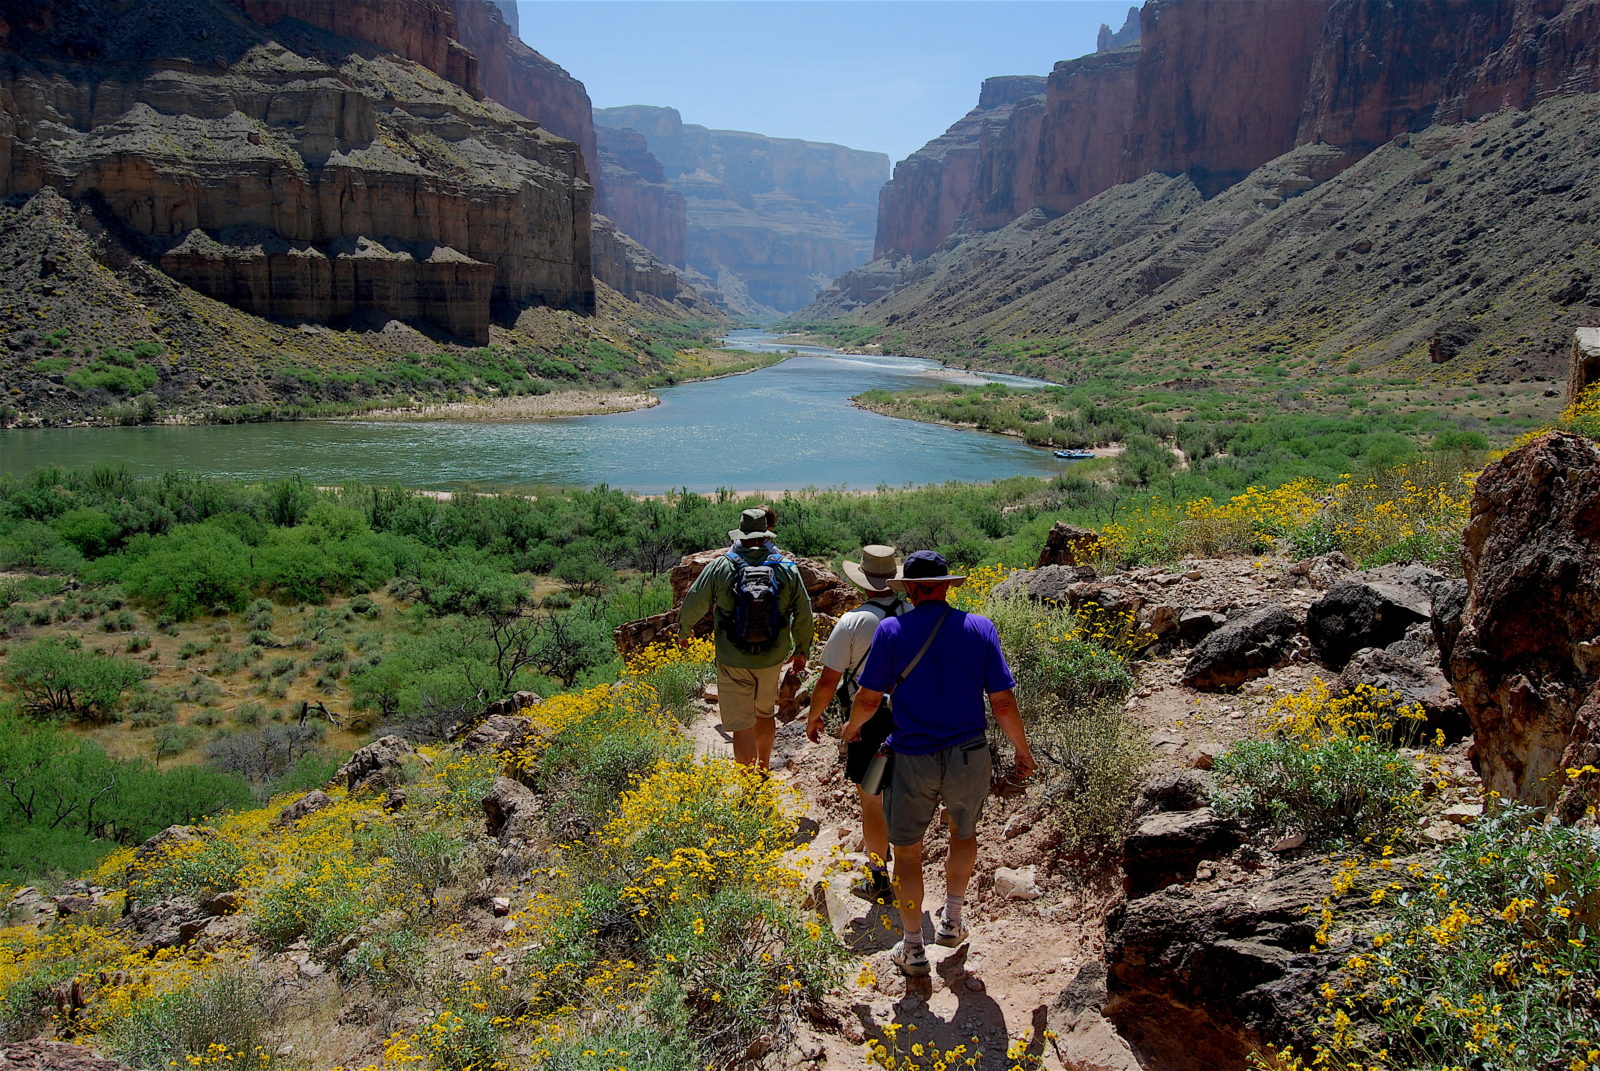 Hikers on the Nakoweap Trail in the Grand Canyon